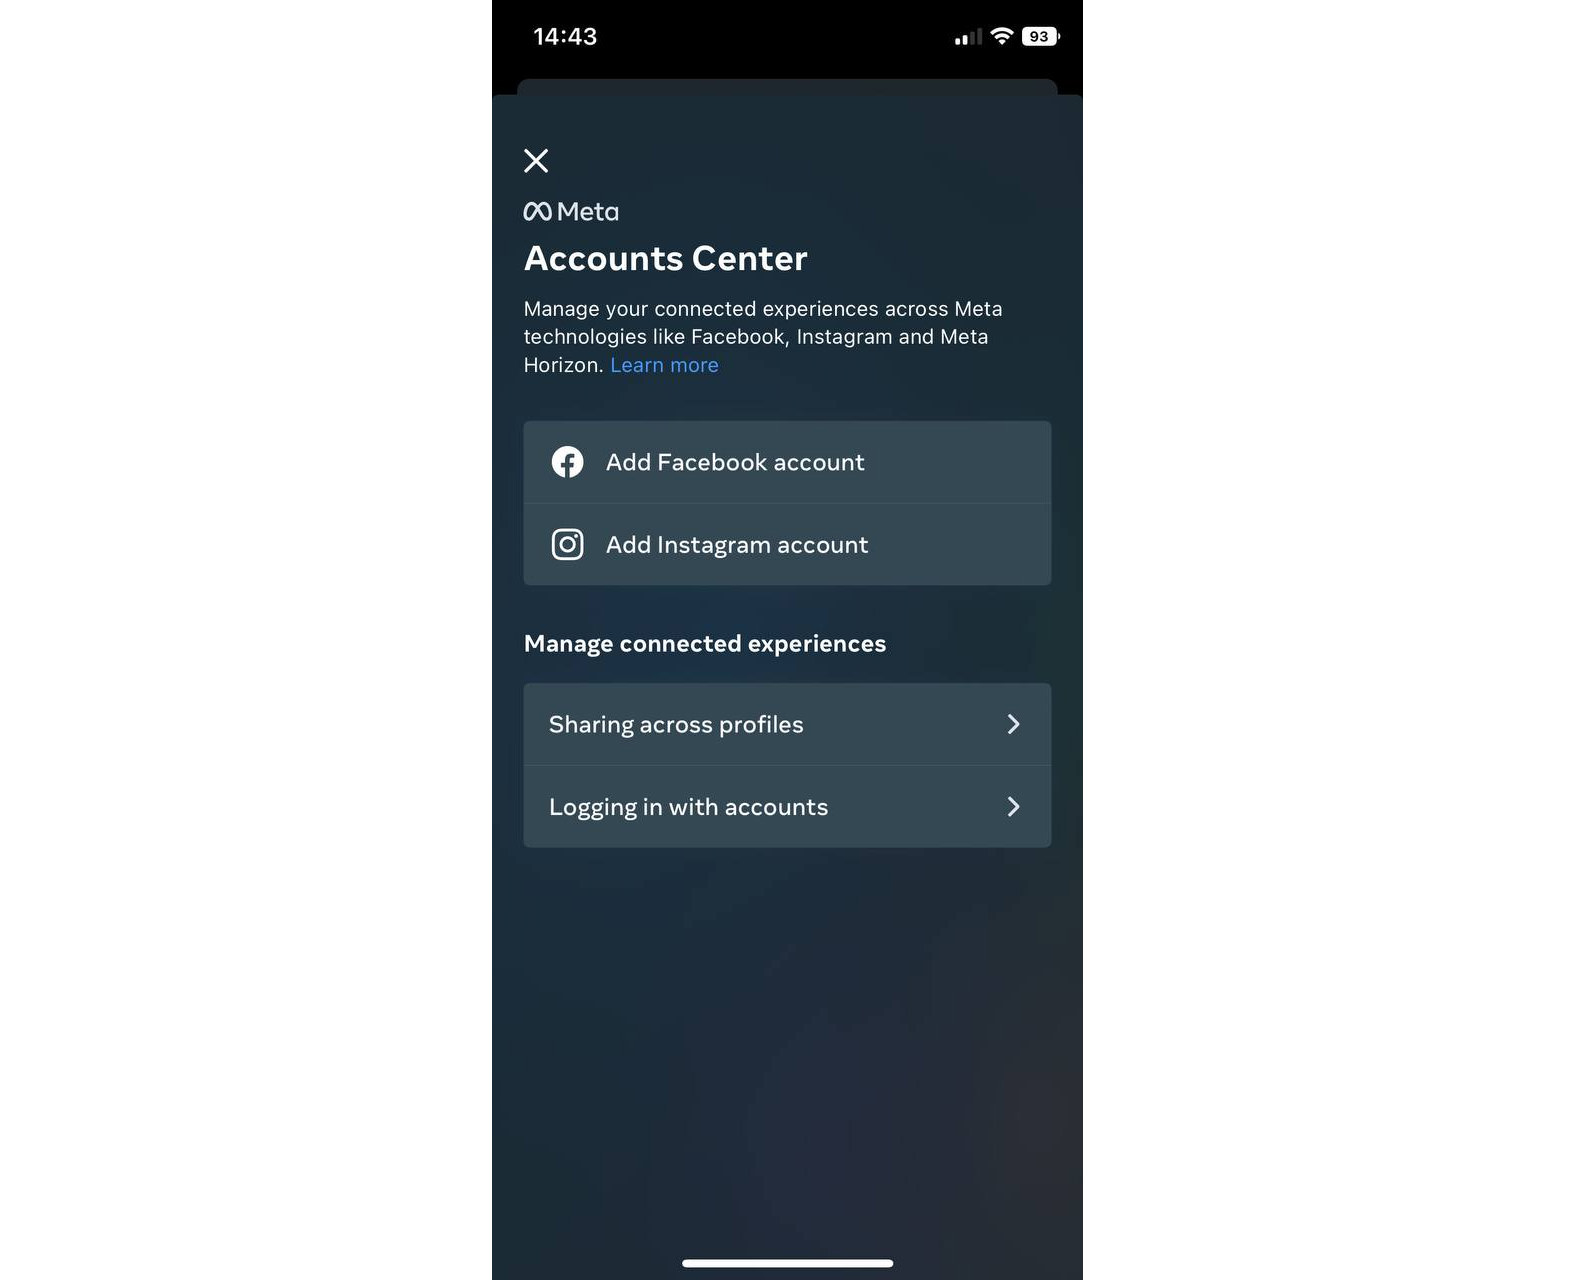 Accounts Center meta section on the Instagram settings page